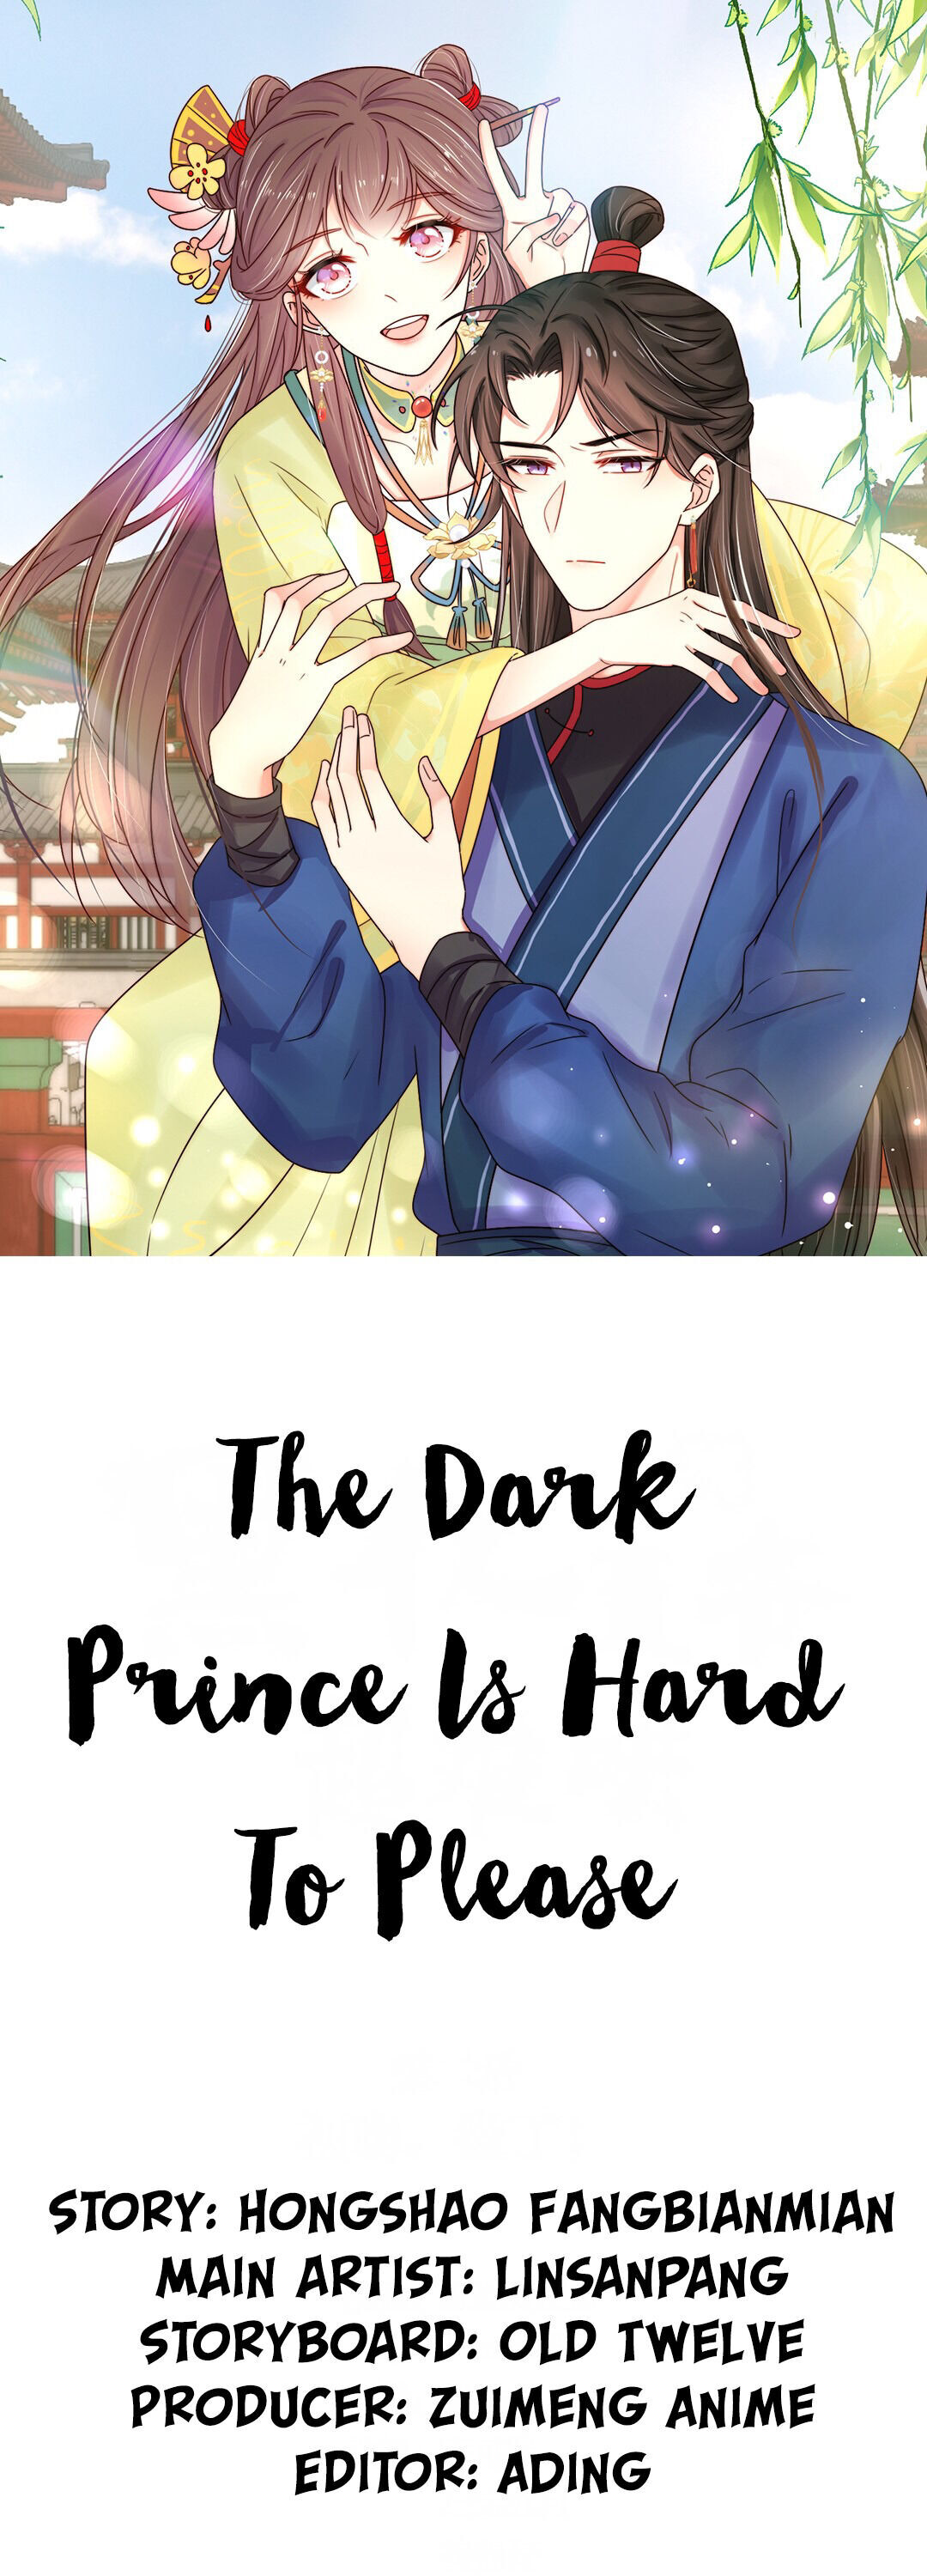 The Dark Prince Is Hard To Please - Page 1